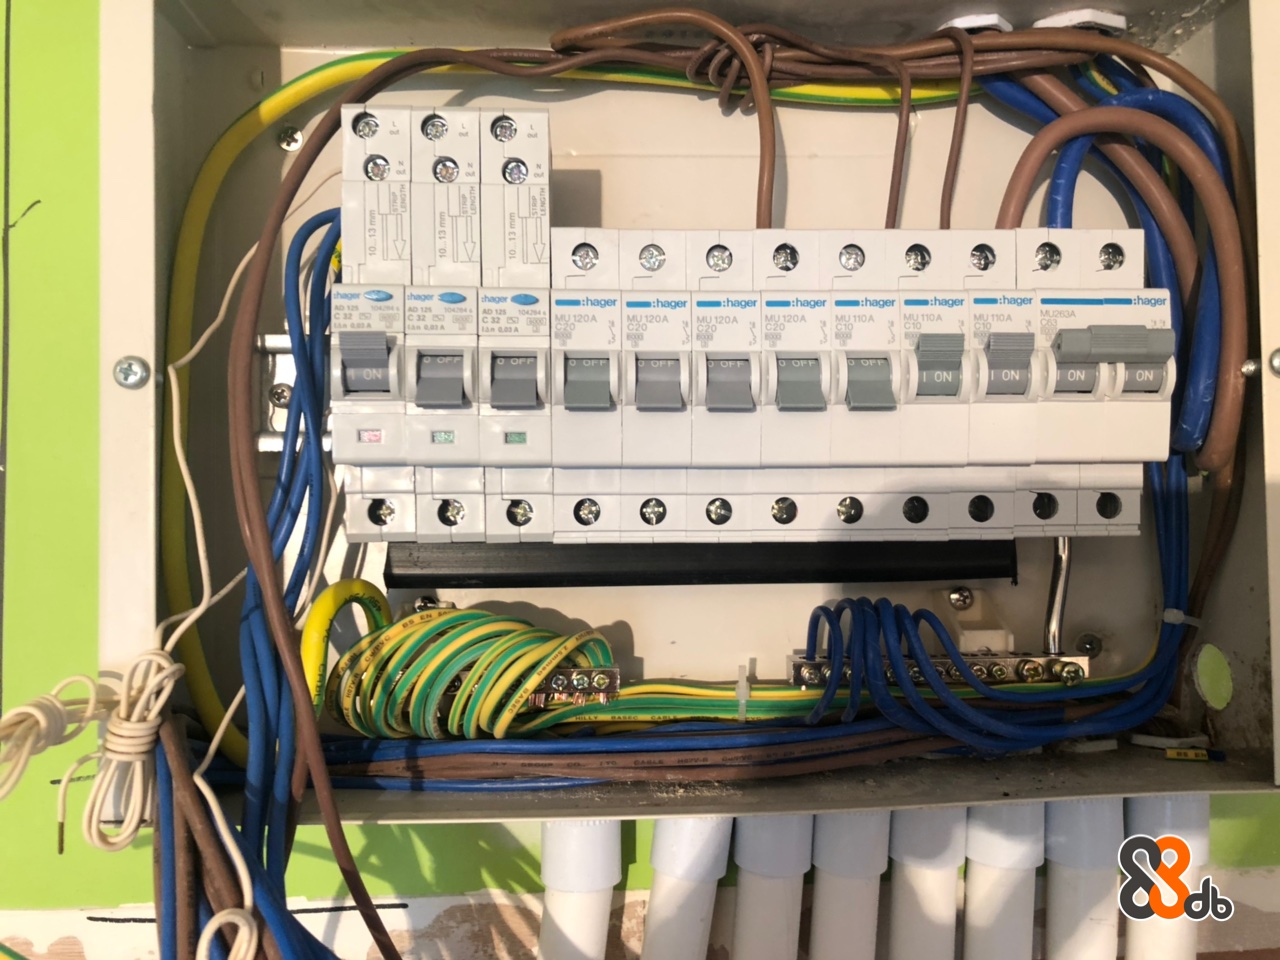 hager thager 110A MU 110A 32 5 I ON I ON ON db 5  Cable management,Electrical wiring,Electrical supply,Networking cables,Machine